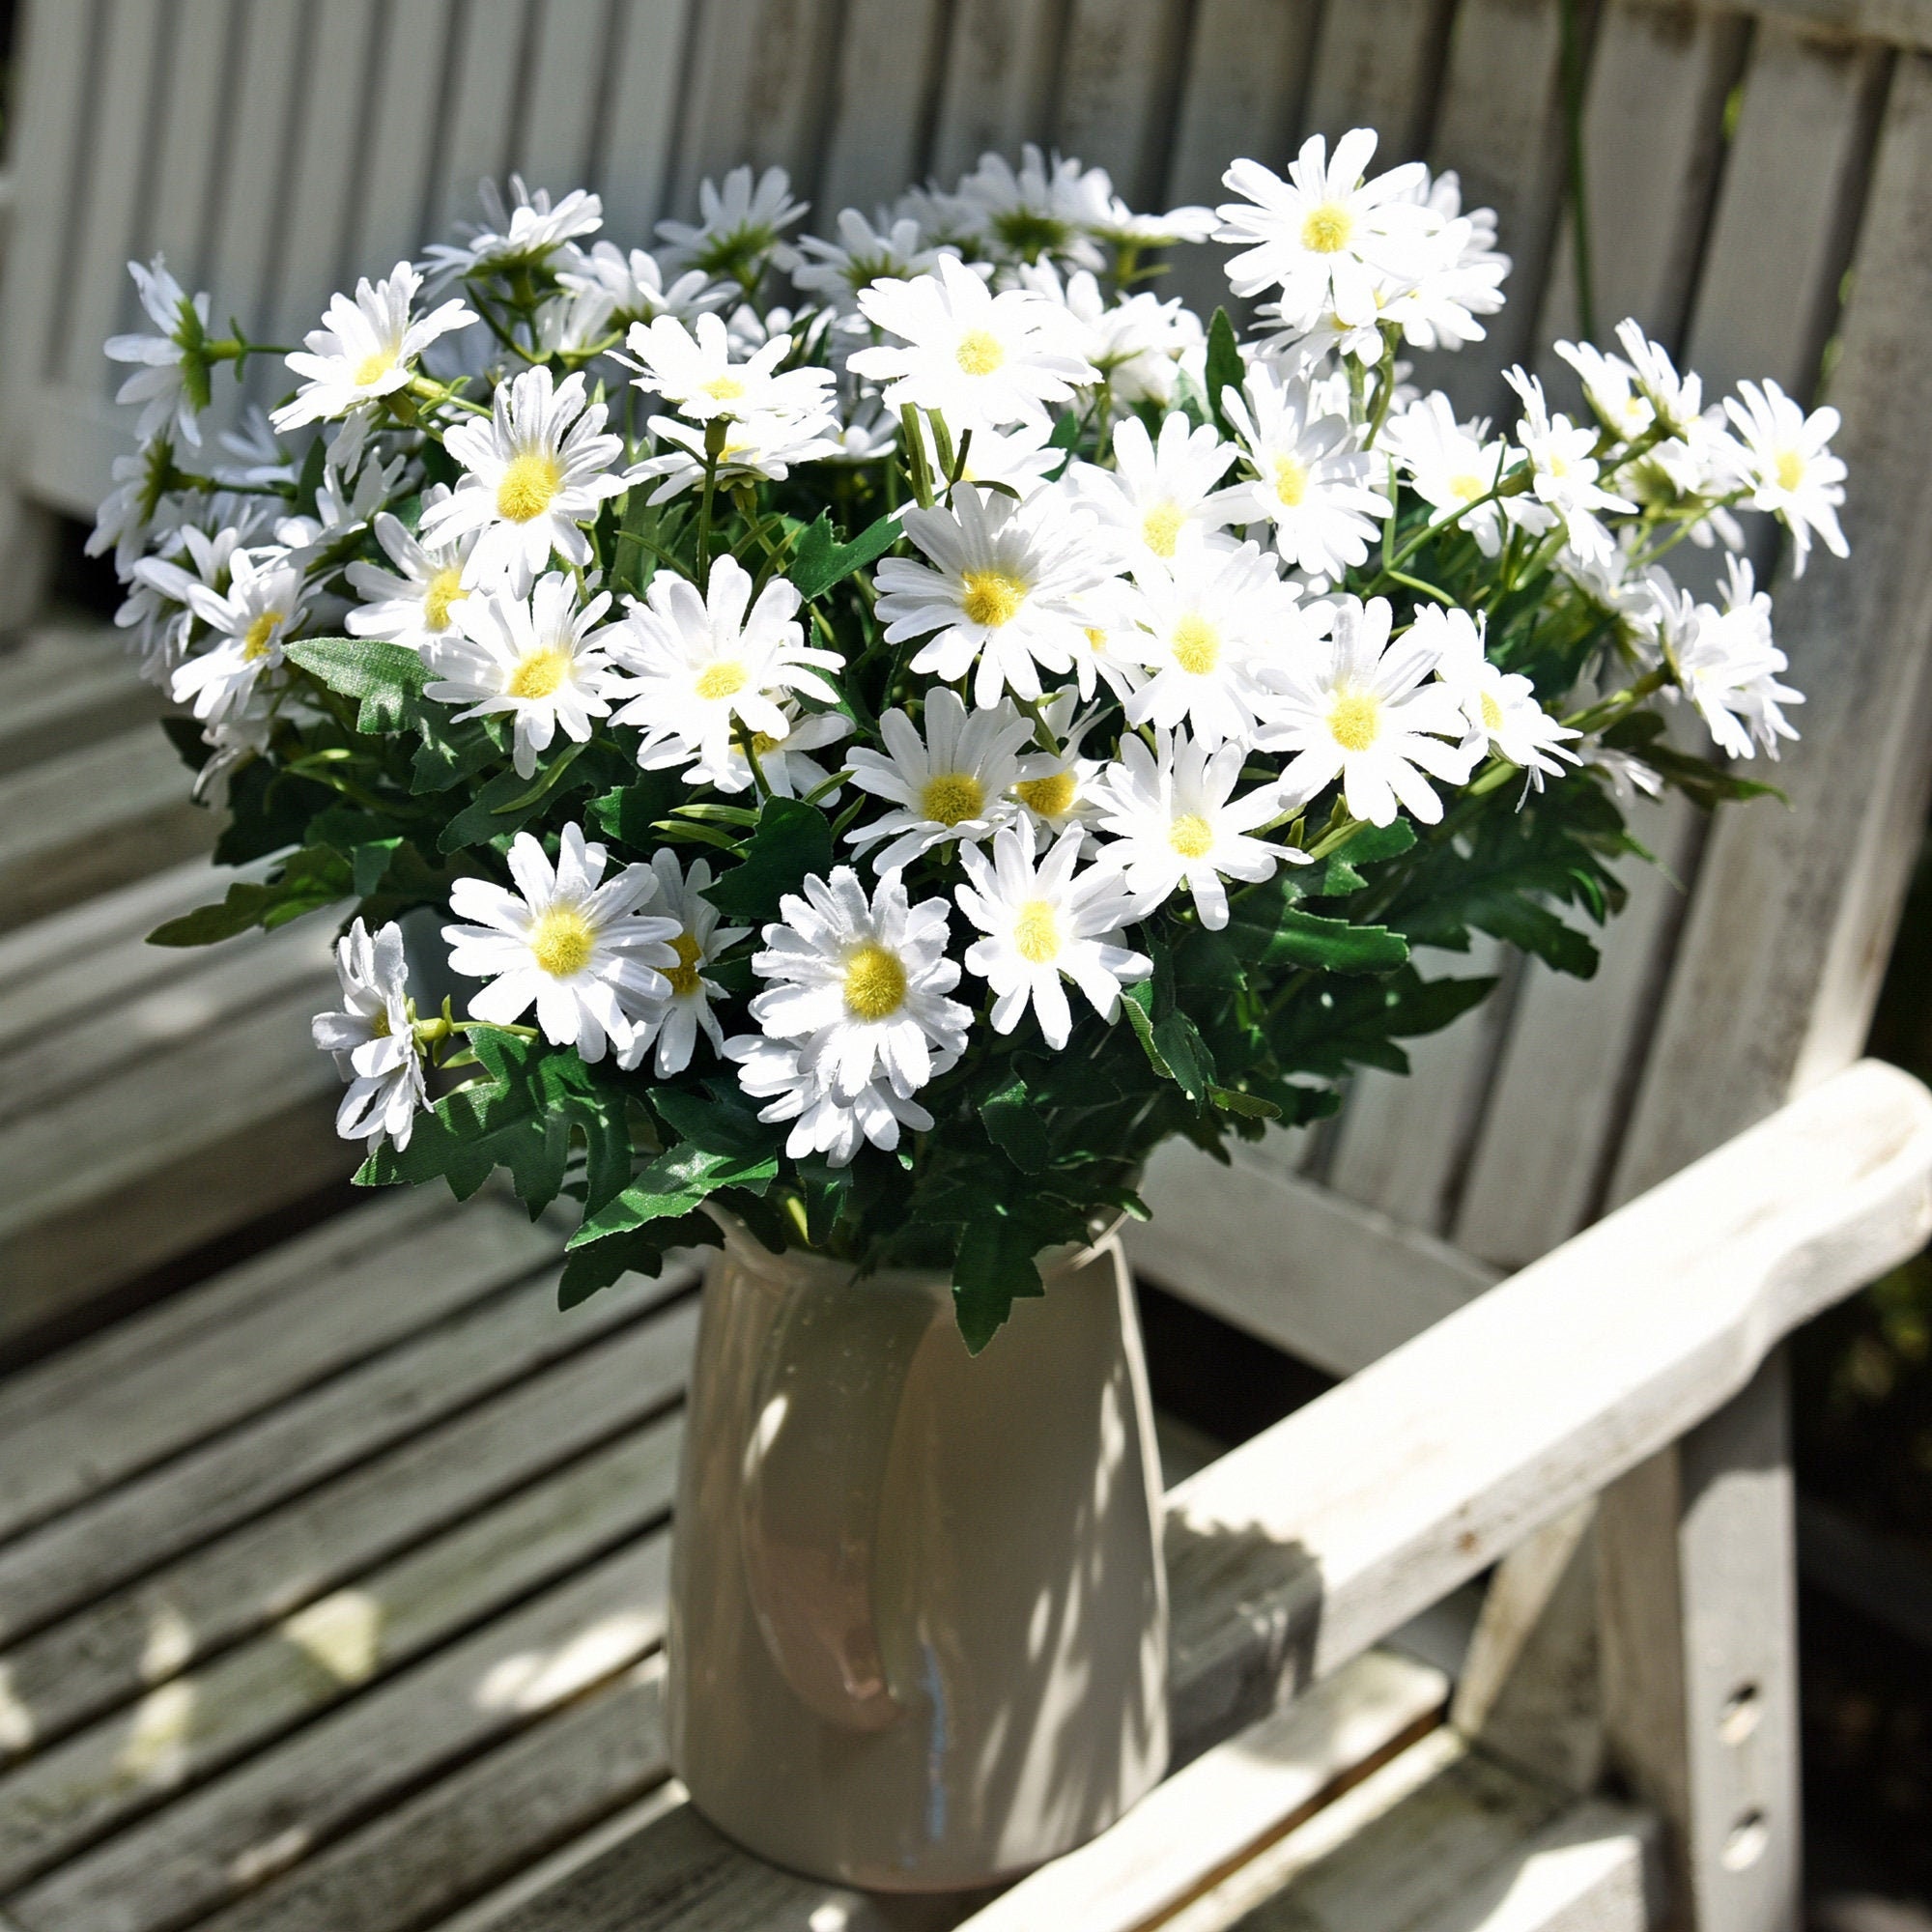 Buy LENJKYYO Artificial Flowers, 10pcs Silk Daisy, Artificial Gerber Daisy  for Home Decoration, Artificial Daisy for Wedding Decoration Milk-White  Online at Low Prices in India 